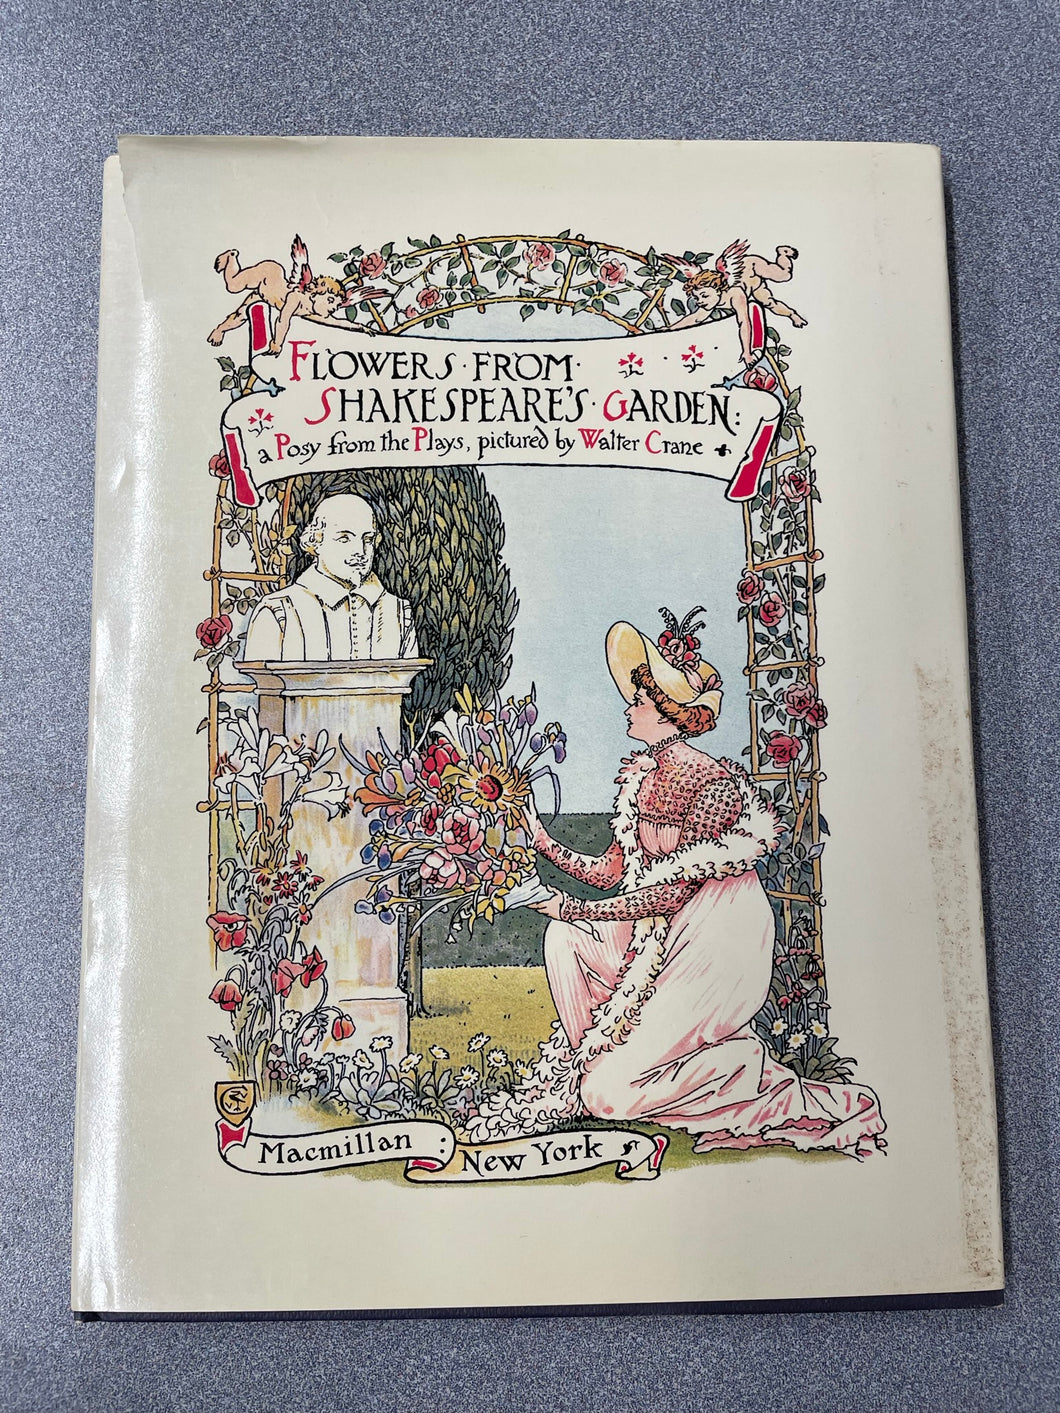 Flowers From Shakespeare's Garden: A Posy From the Plays, Crane, Walter [1980] SH 9/23